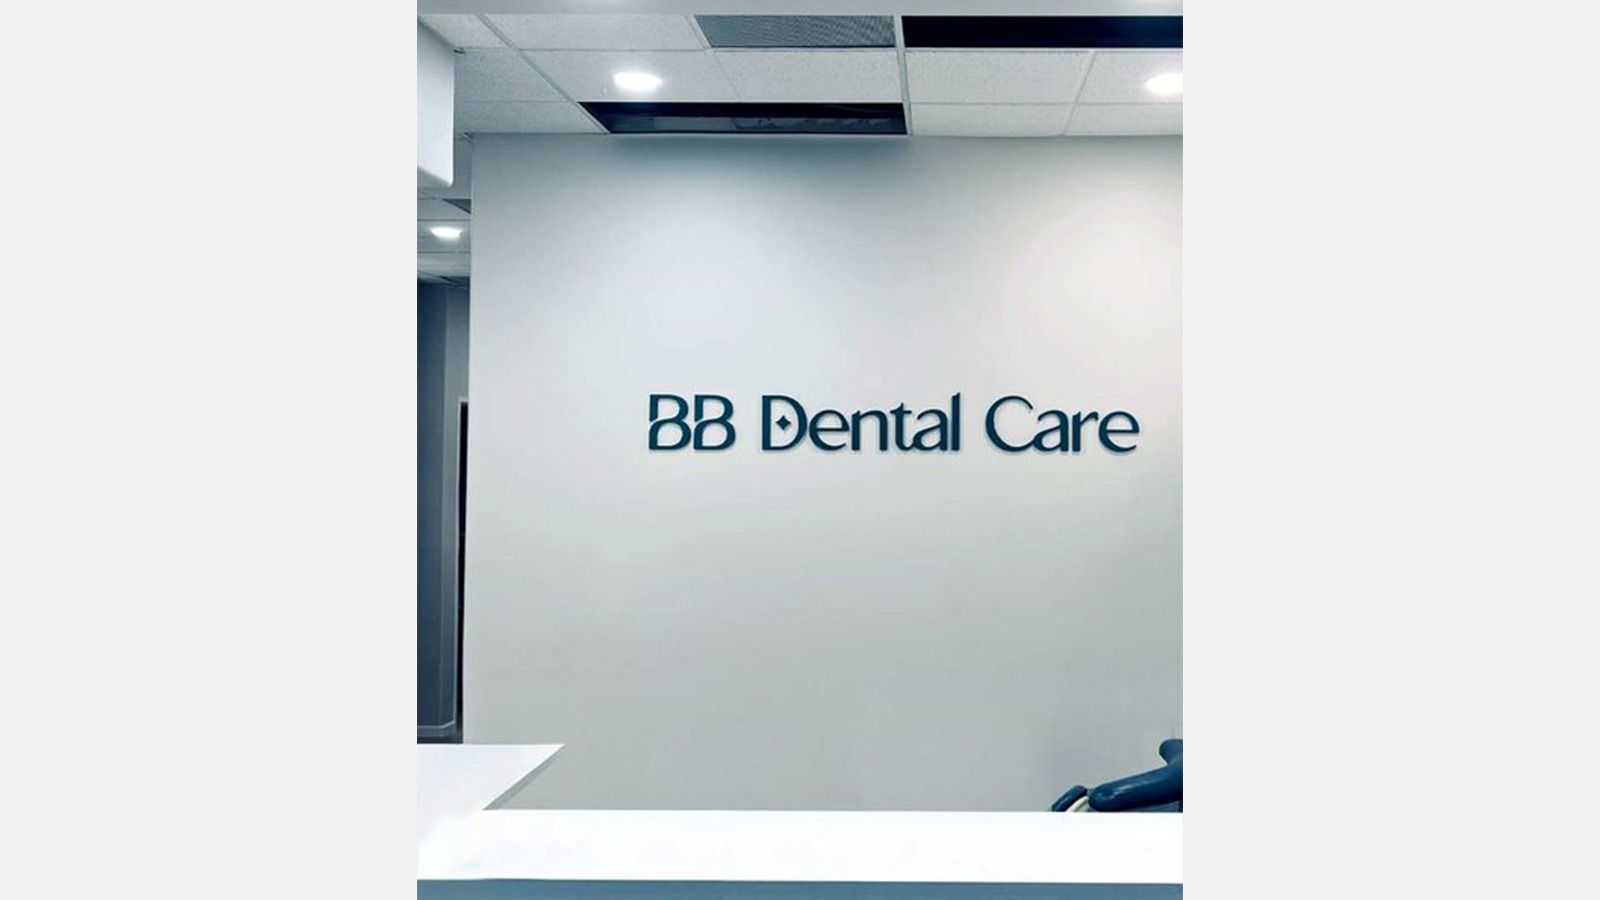 BB Dental Care lobby sign fixed to the wall